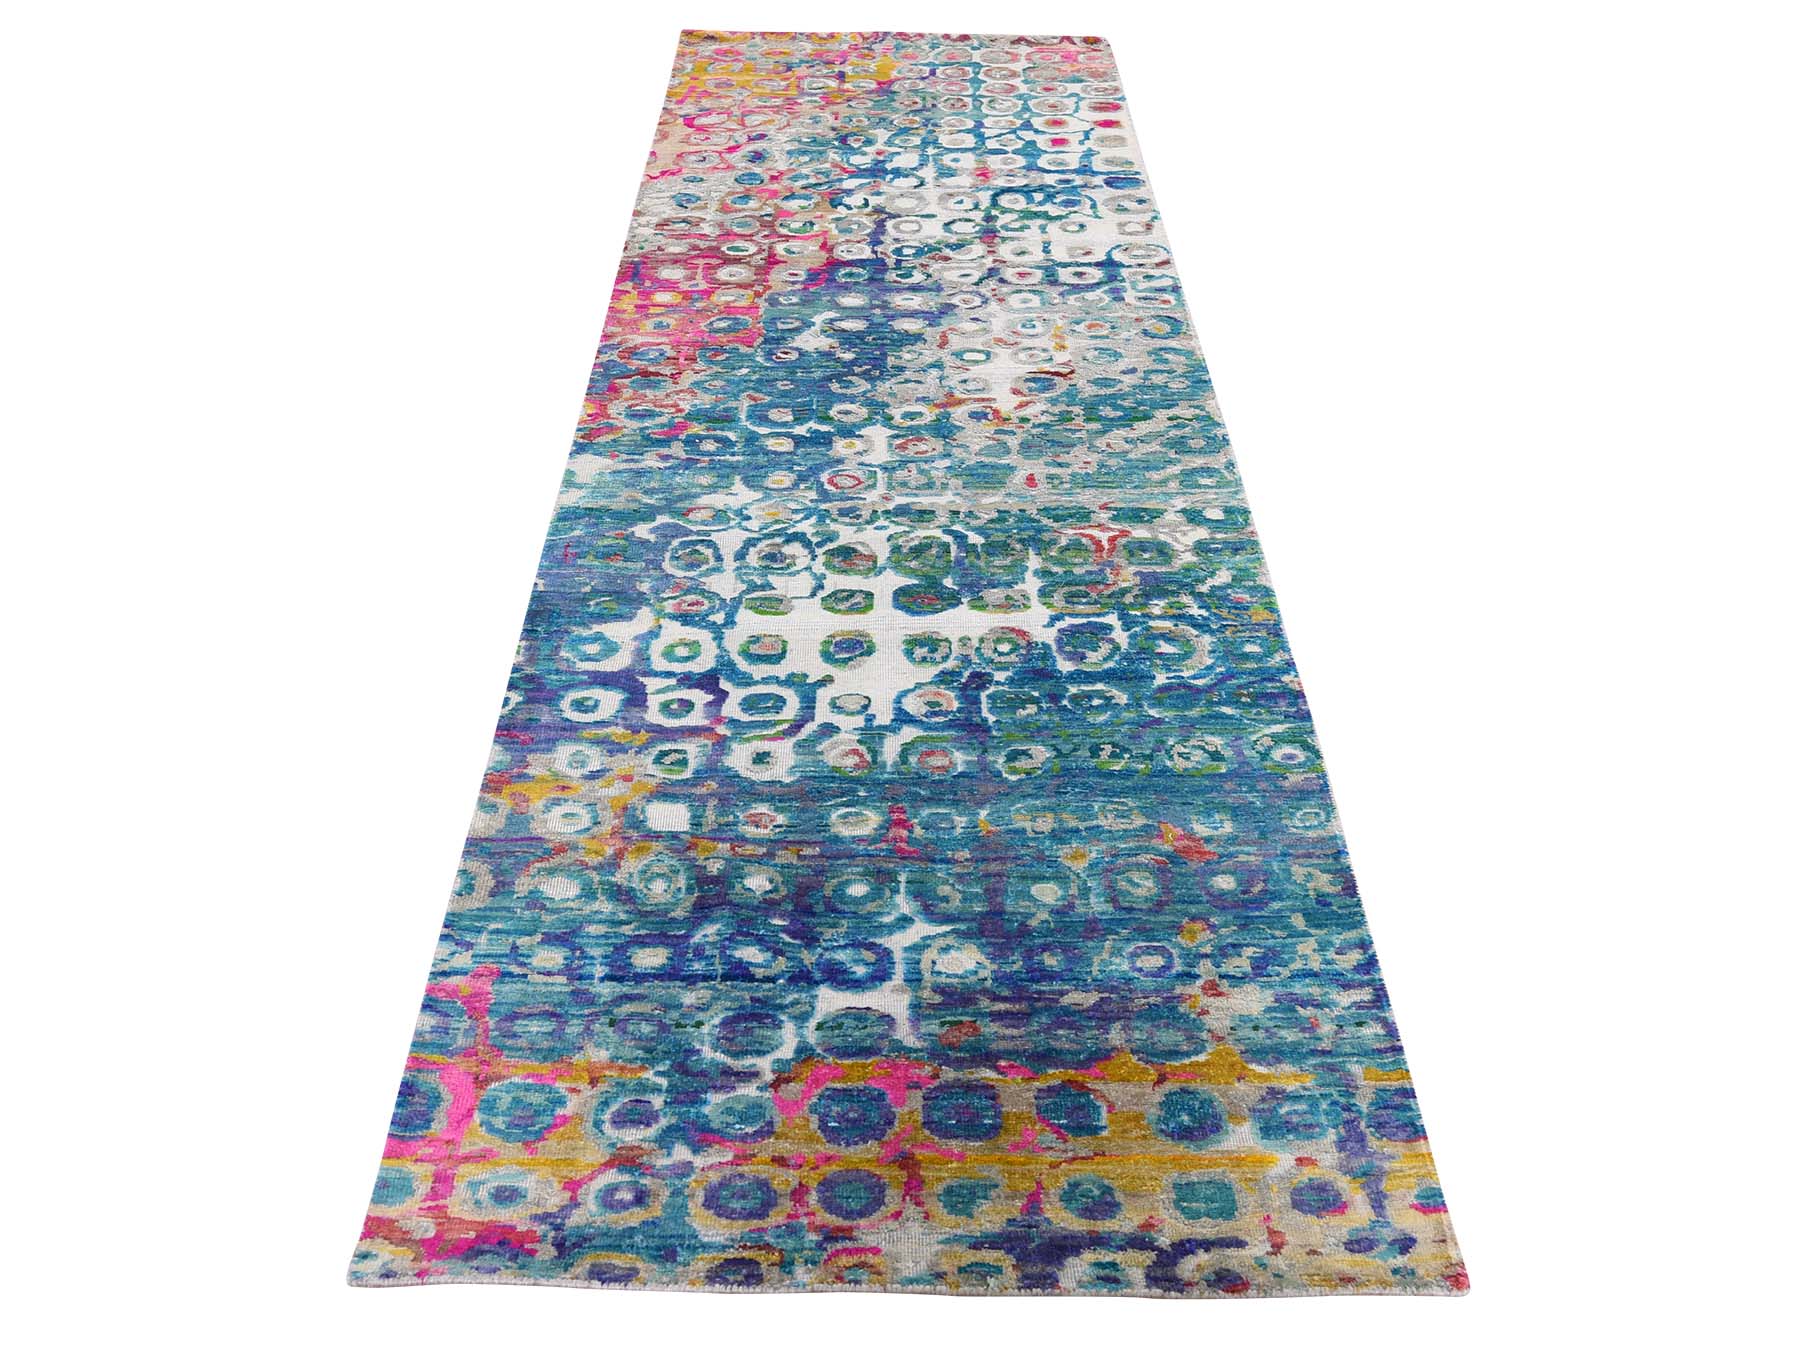 2'8"X10'4" The Peacock Sari Silk Colorful Runner Hand-Knotted Oriental Rug moade86d